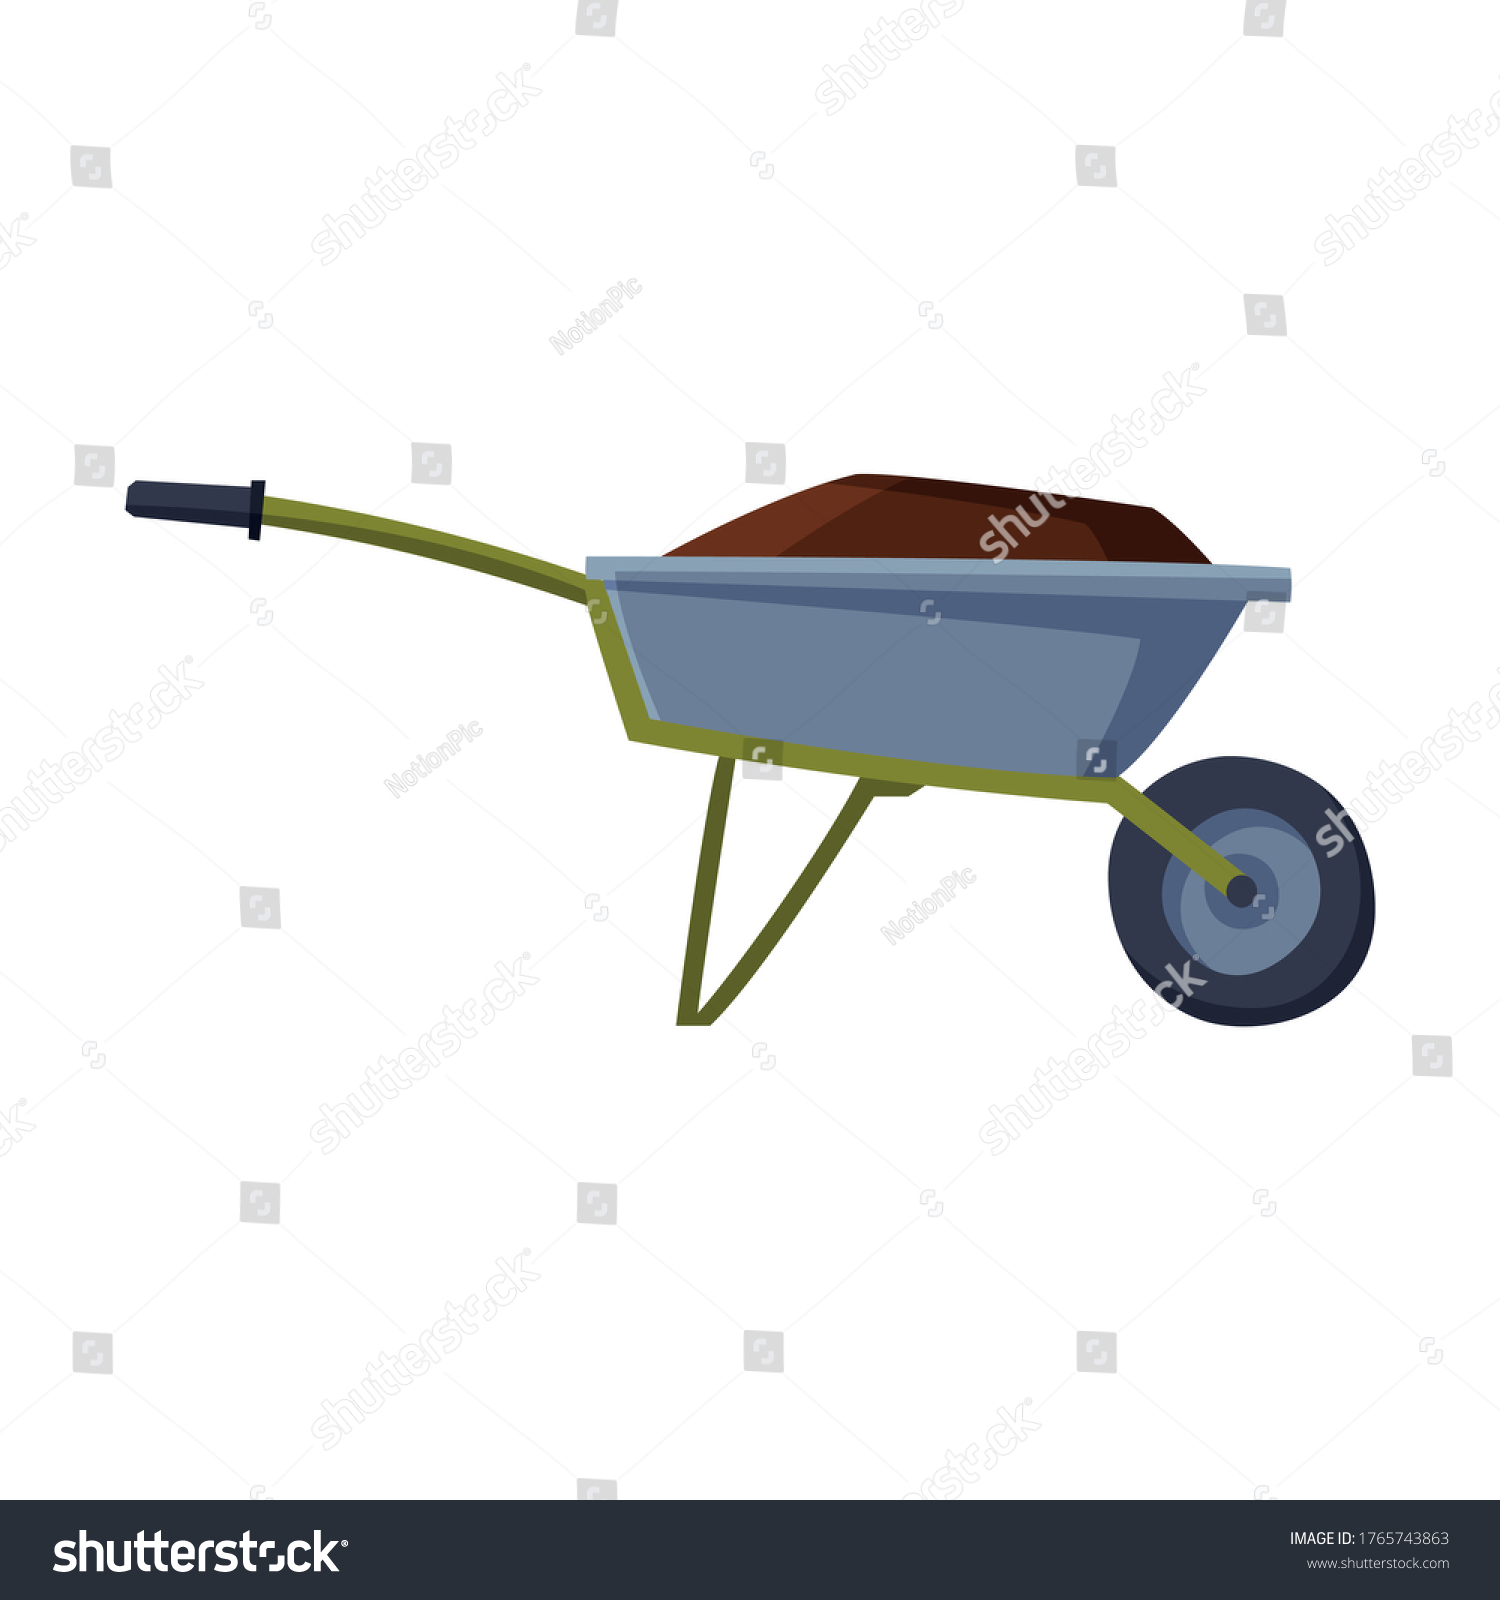 SVG of Garden Wheelbarrow Full of Soil or Compost, Agriculture Work Equipment Flat Style Vector Illustration on White Background svg